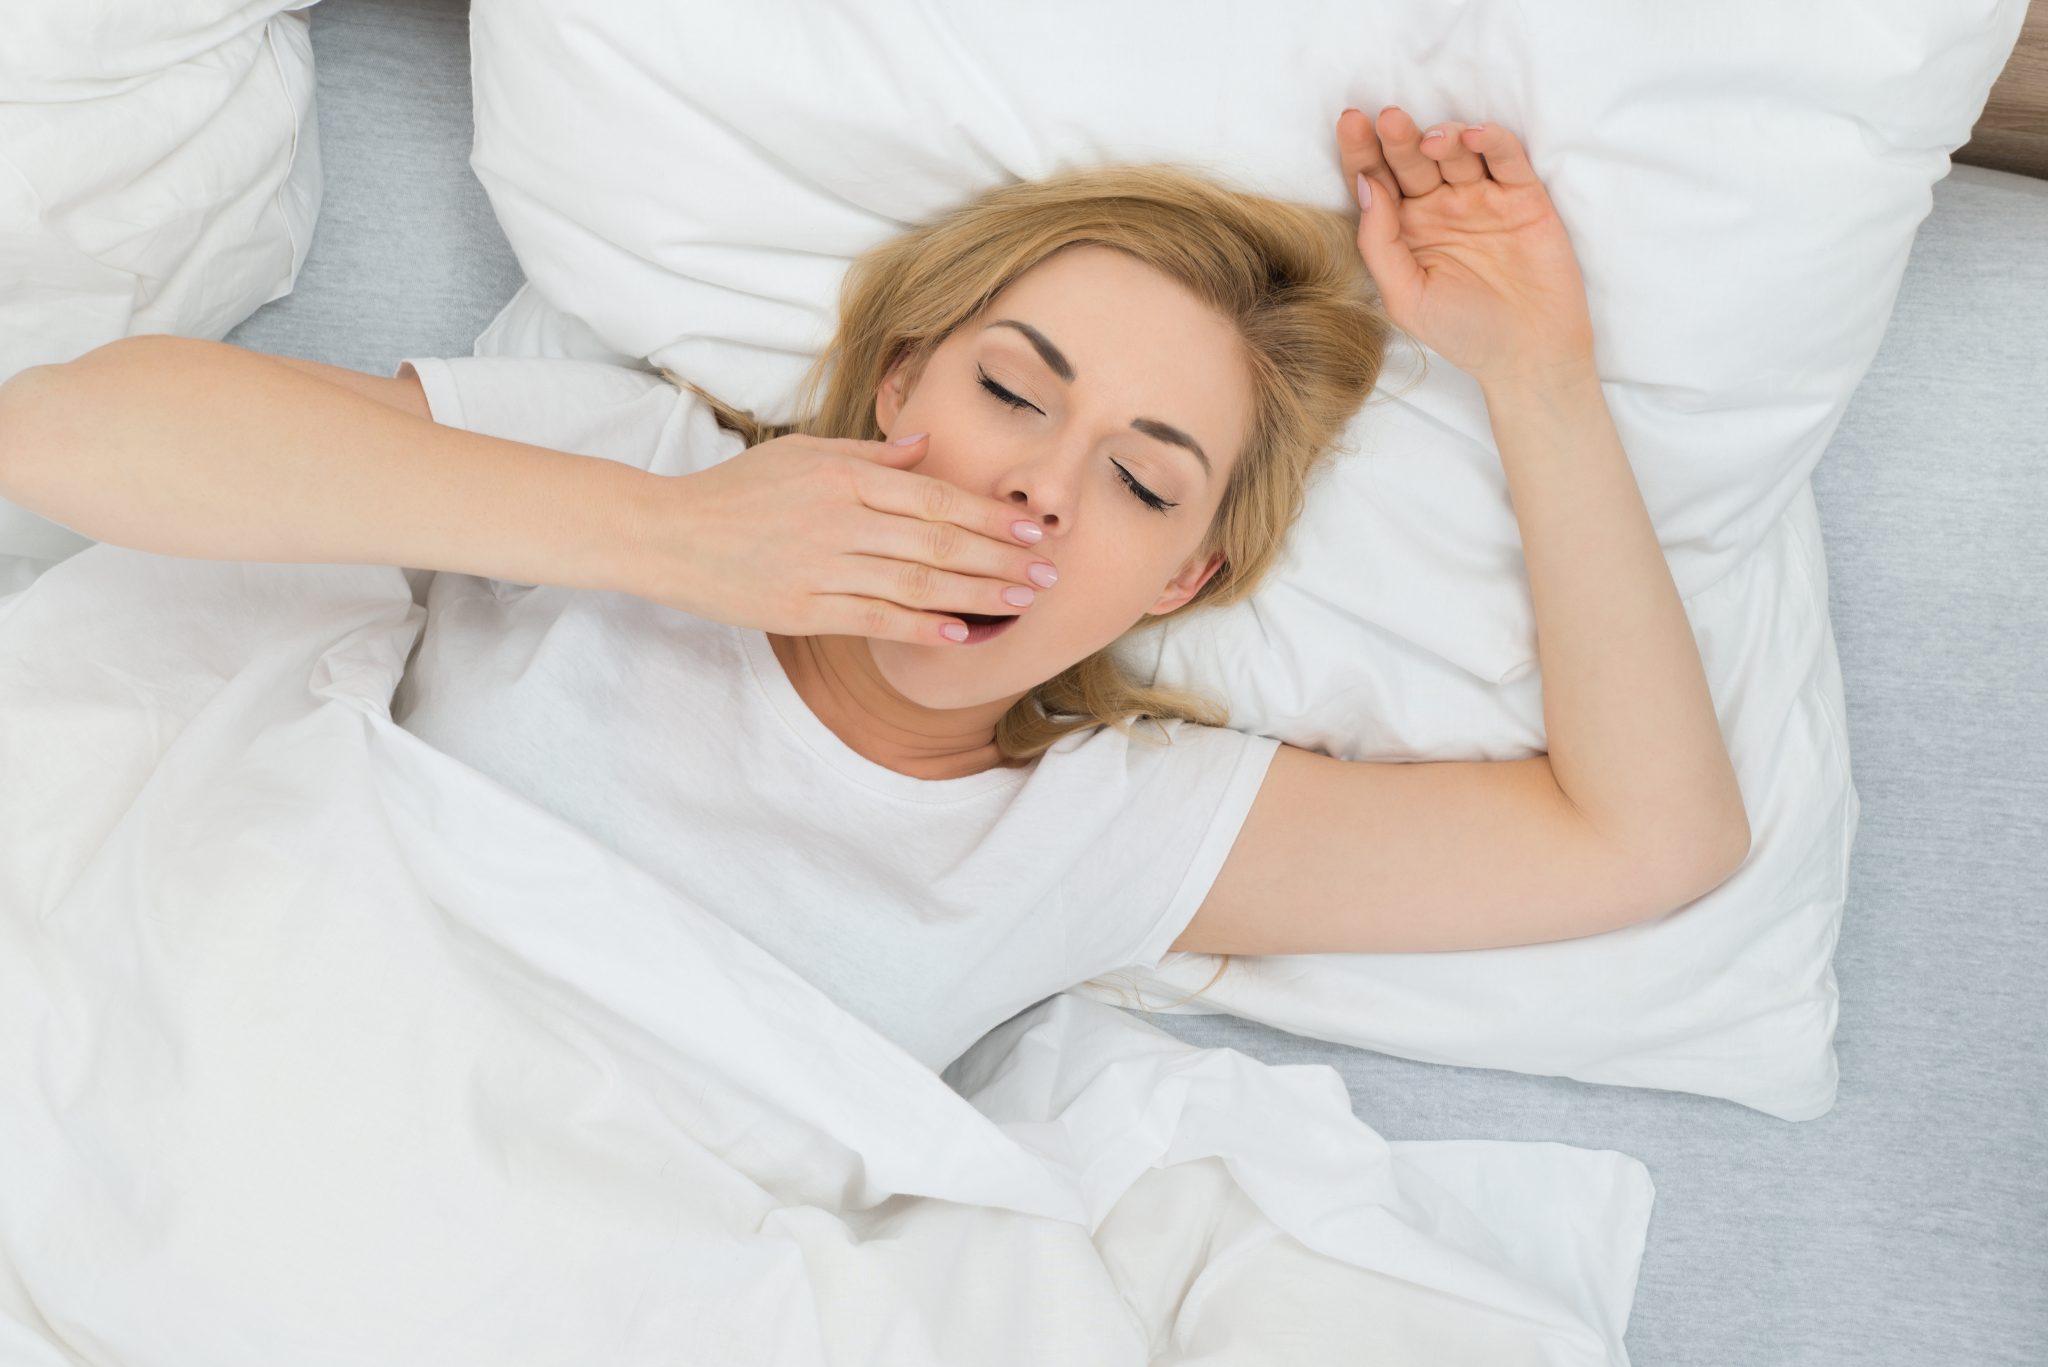 How does your sleep position affect your health?